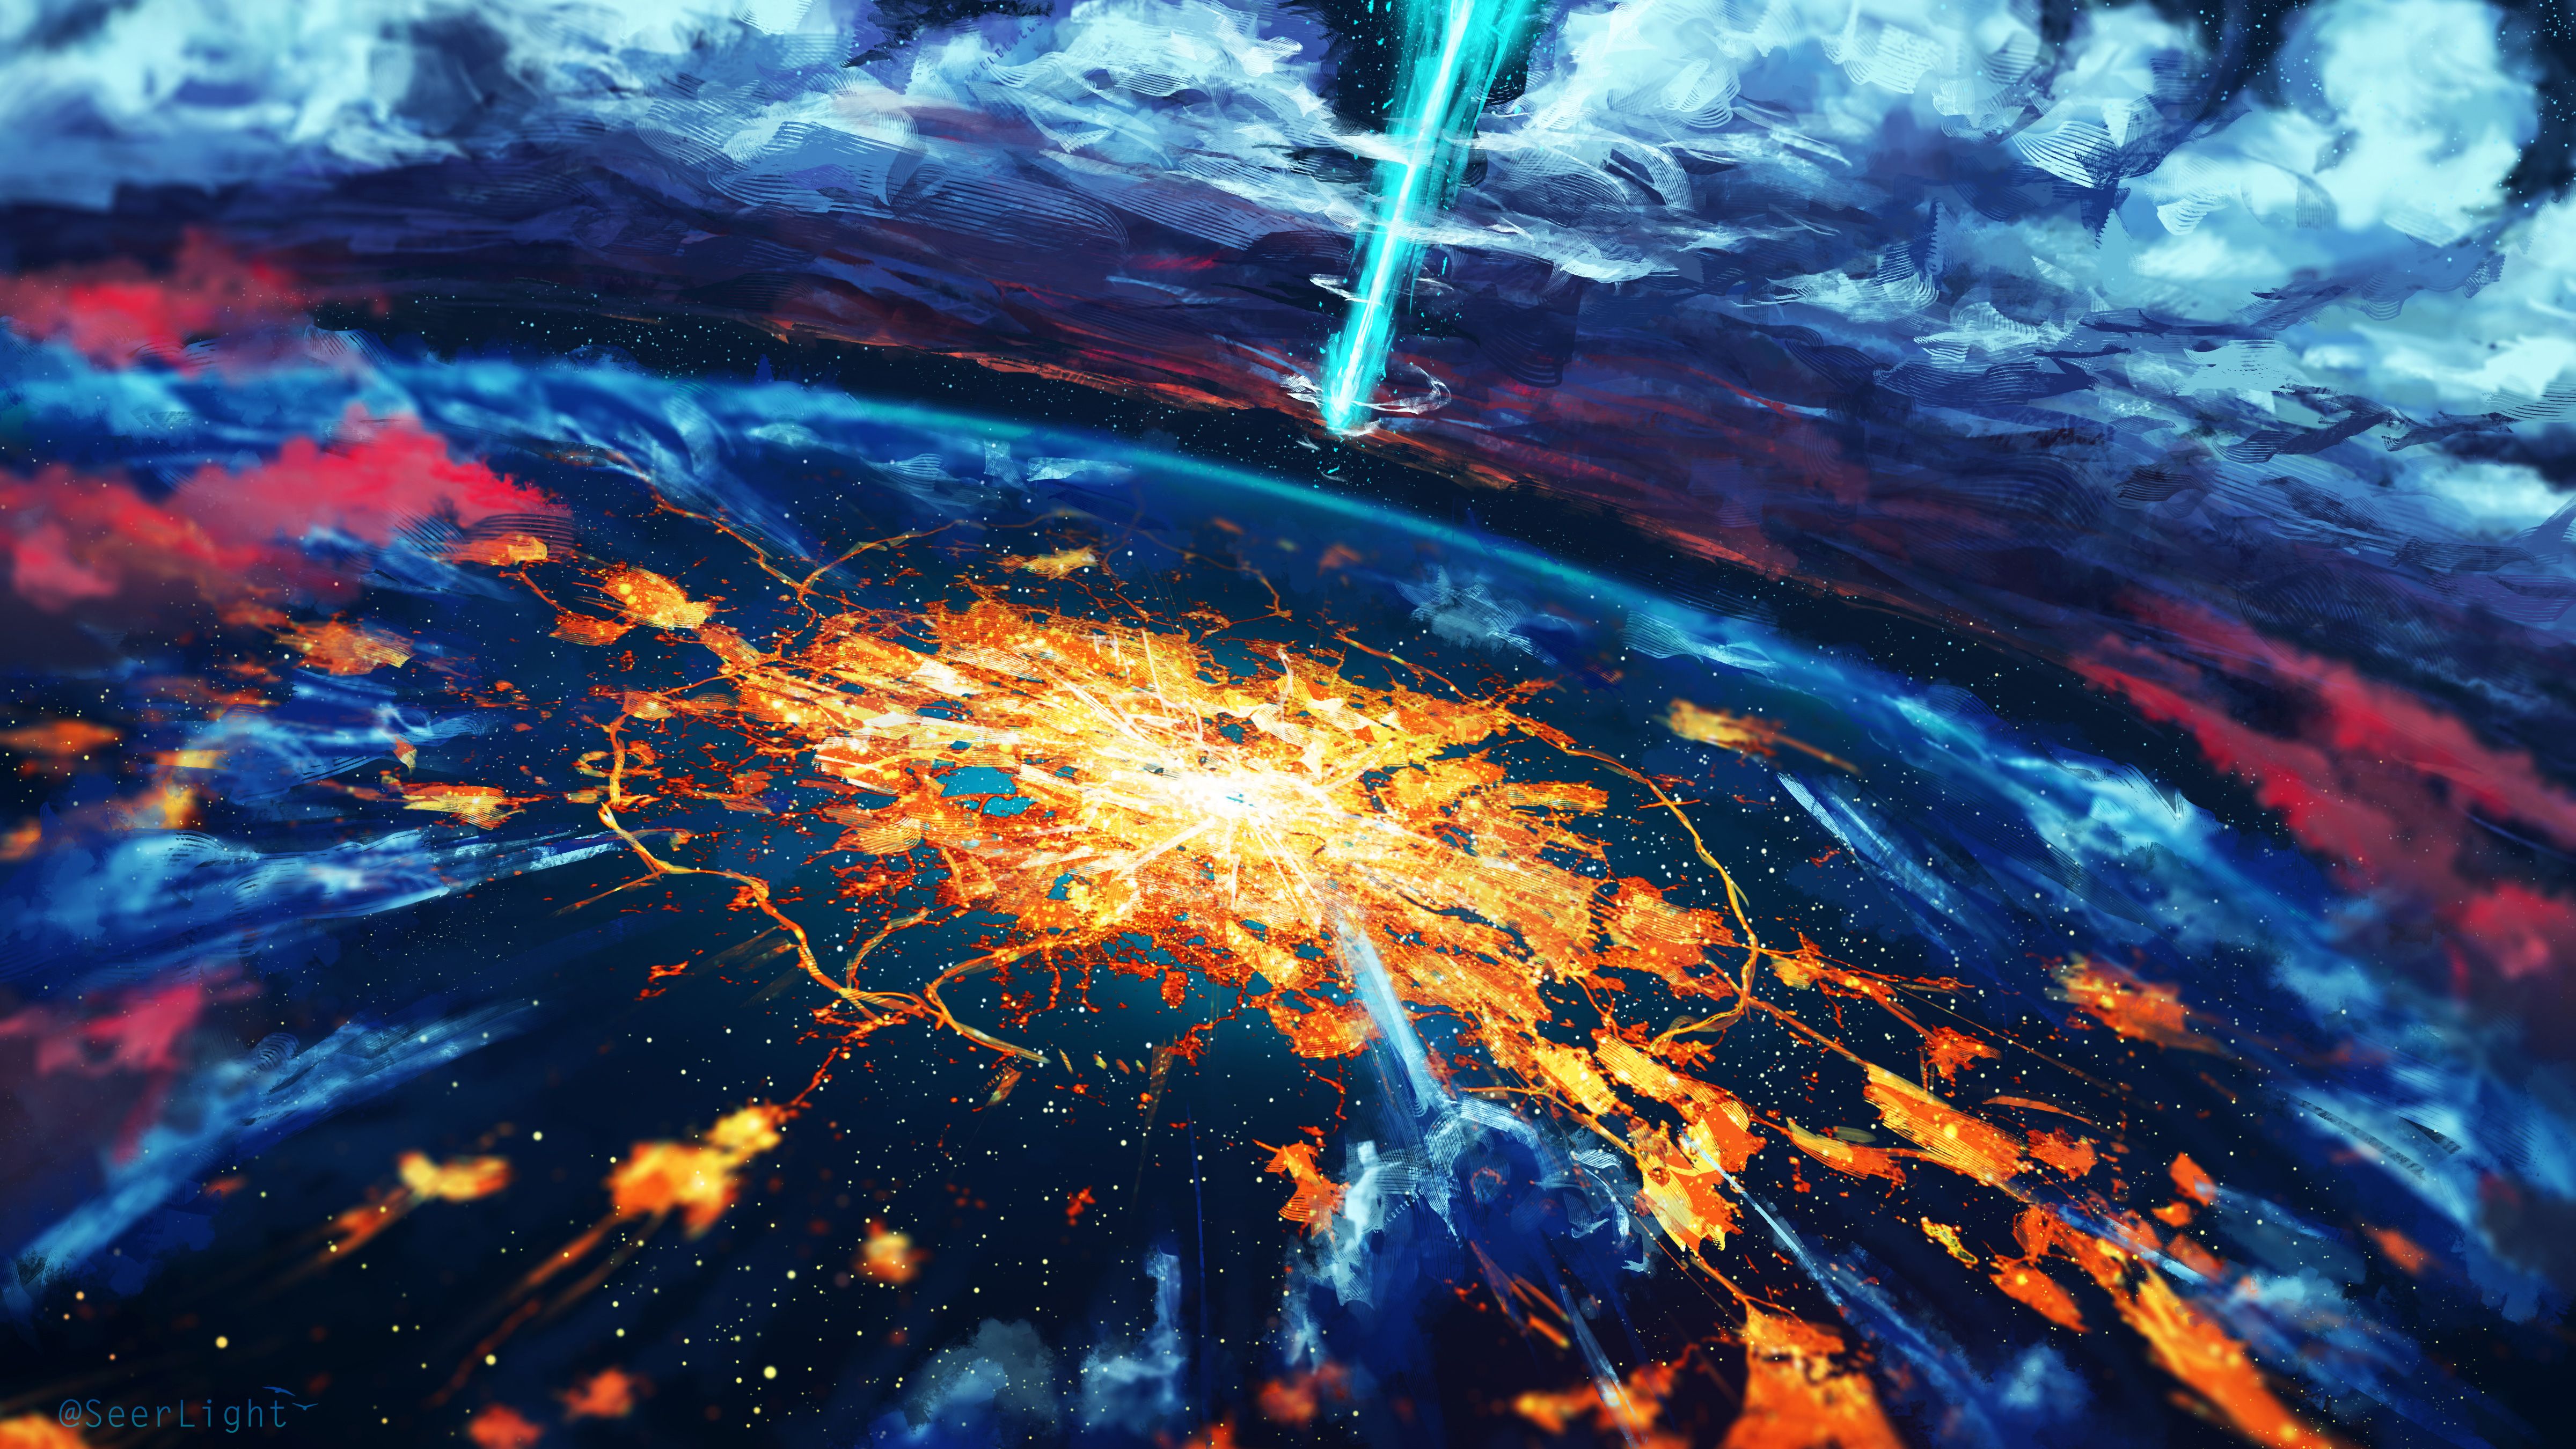 Apocalypse Cosmos Disaster Explosion World, HD Artist, 4k Wallpaper, Image, Background, Photo and Picture